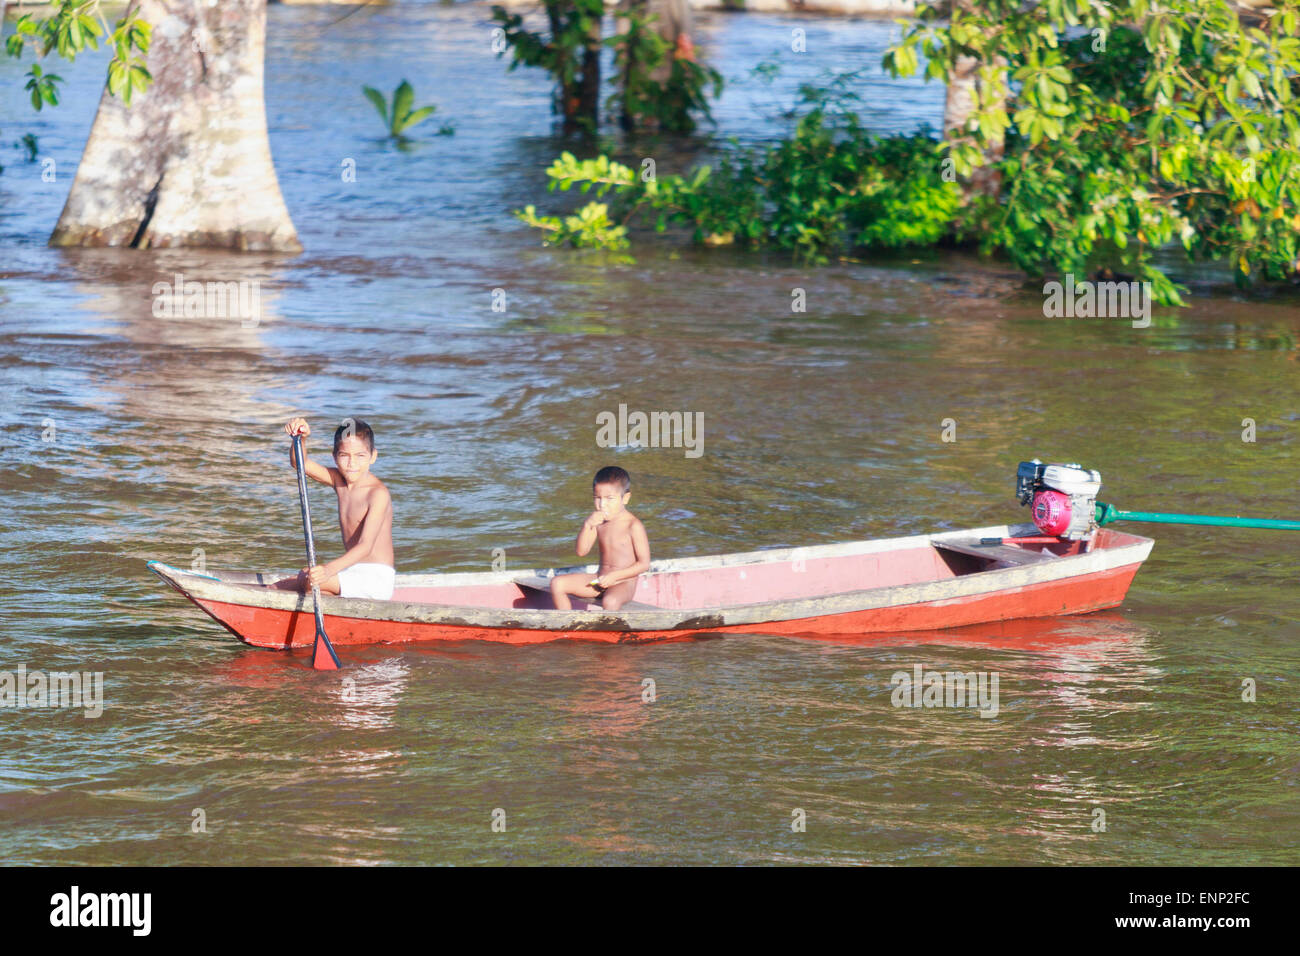 Young native children on the Amazon river during the wet season. 2 boys. Stock Photo